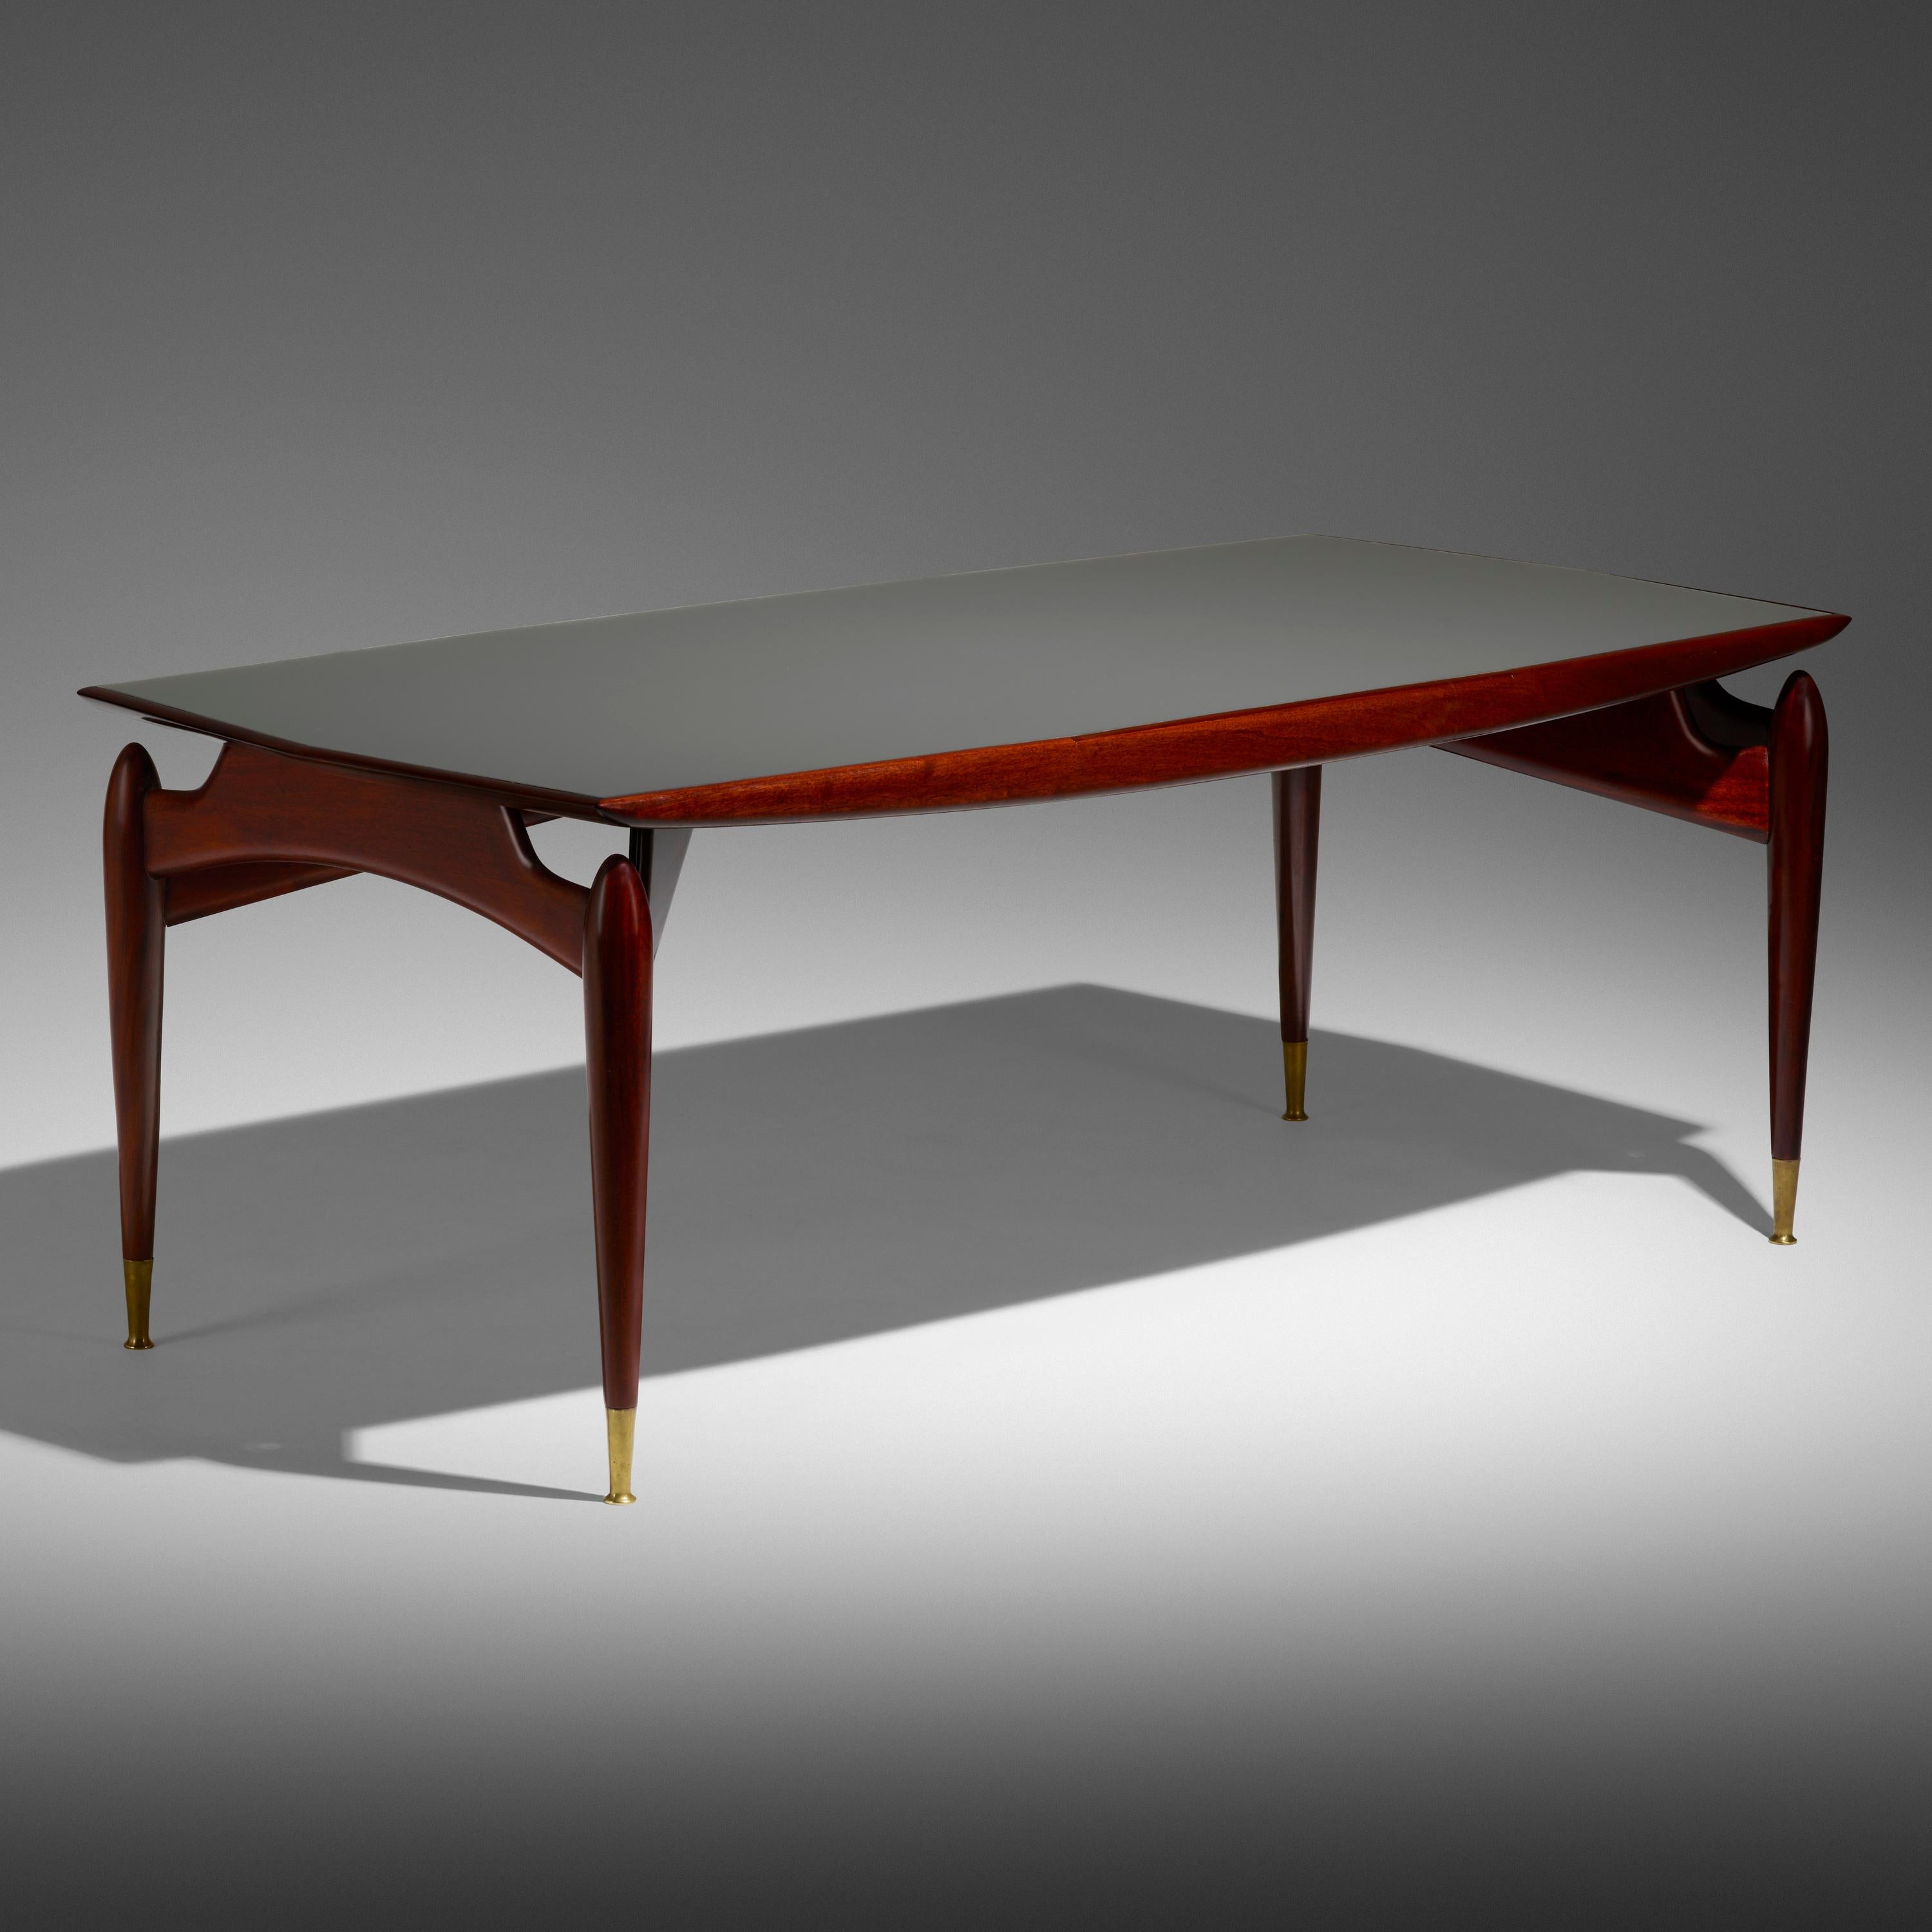 Giuseppe Scapinelli (1891 - 1982)

An imposing and elegant dining table or writing table by Italian-Brazilian designer Giuseppe Scapinelli, in mahogany with a fully opaque, back-painted glass top and brass sabots. The rectangular top, which is